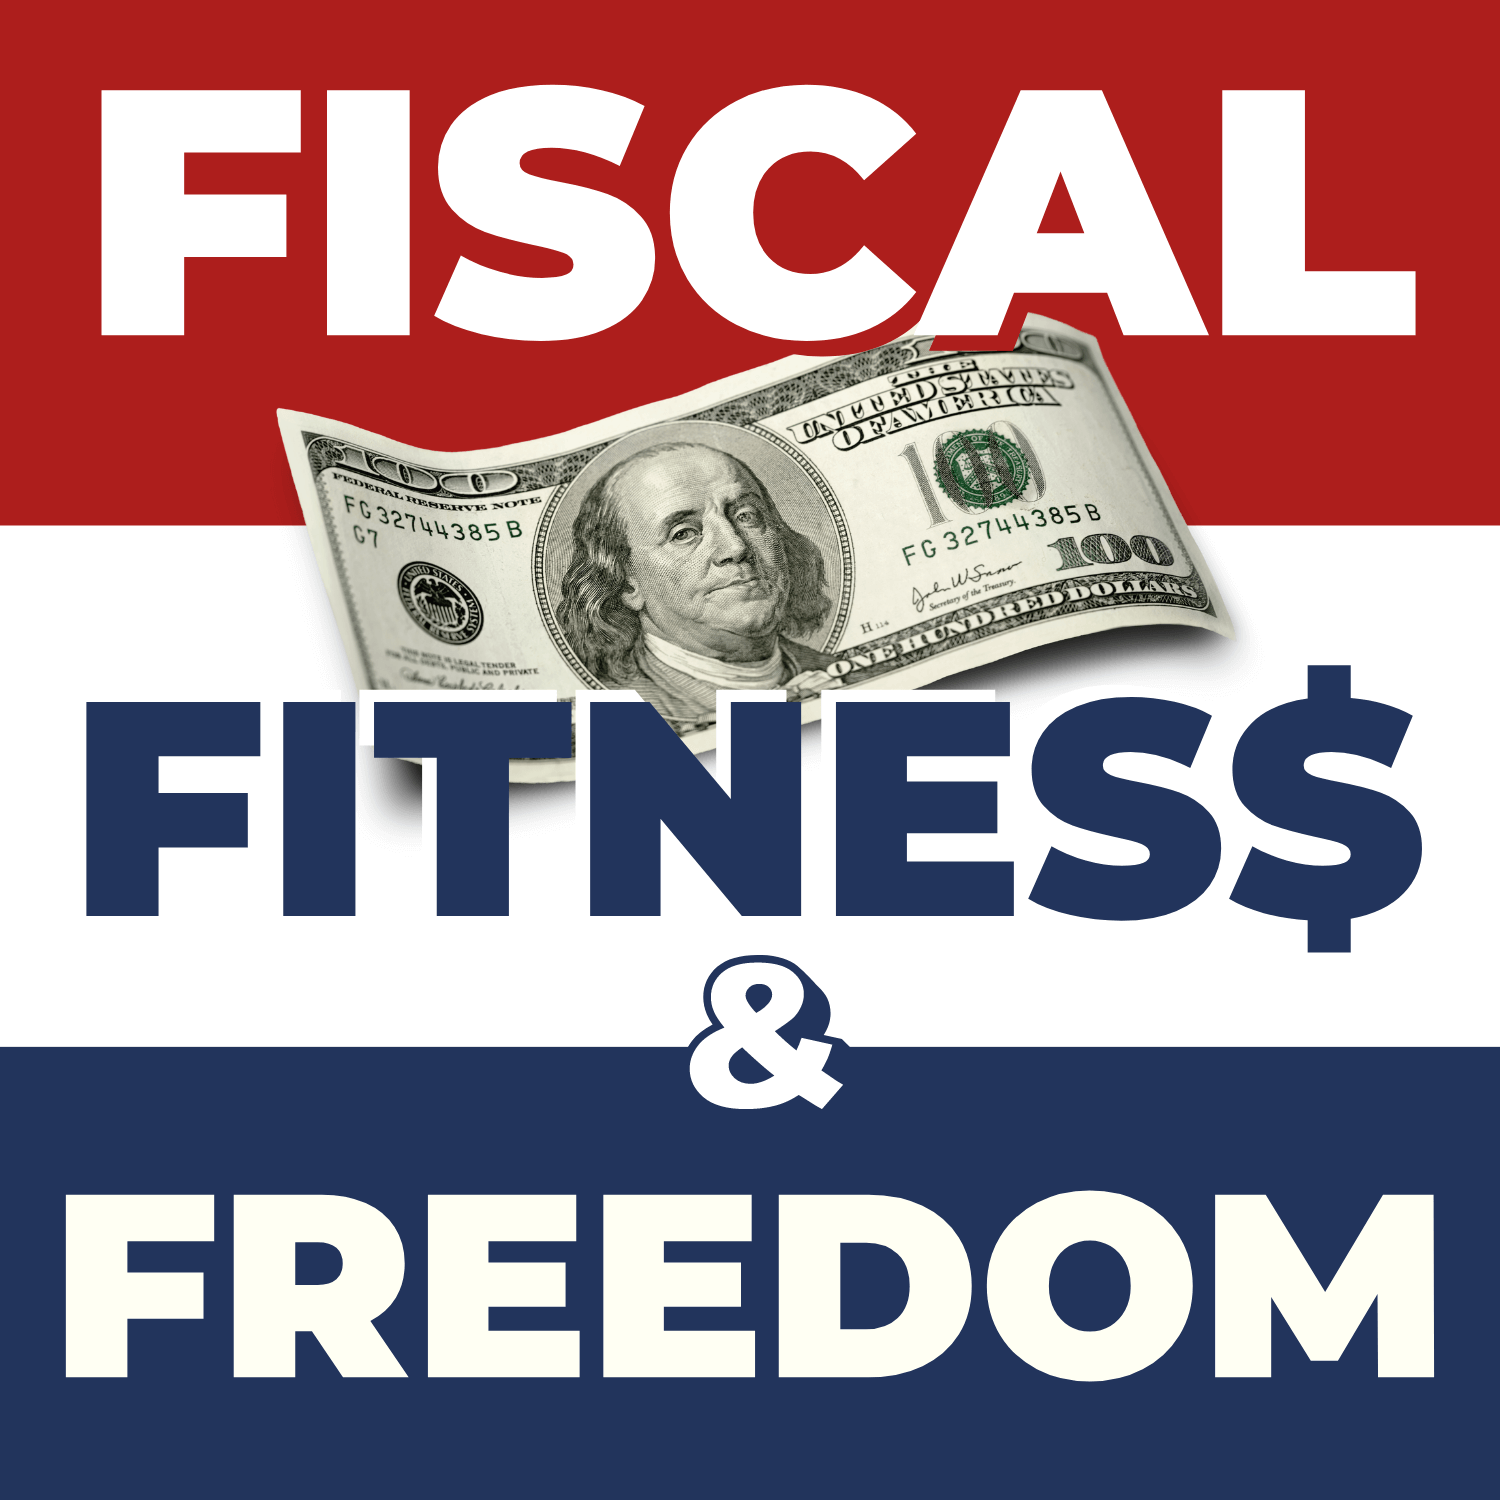 Fiscal Fitness & Freedom